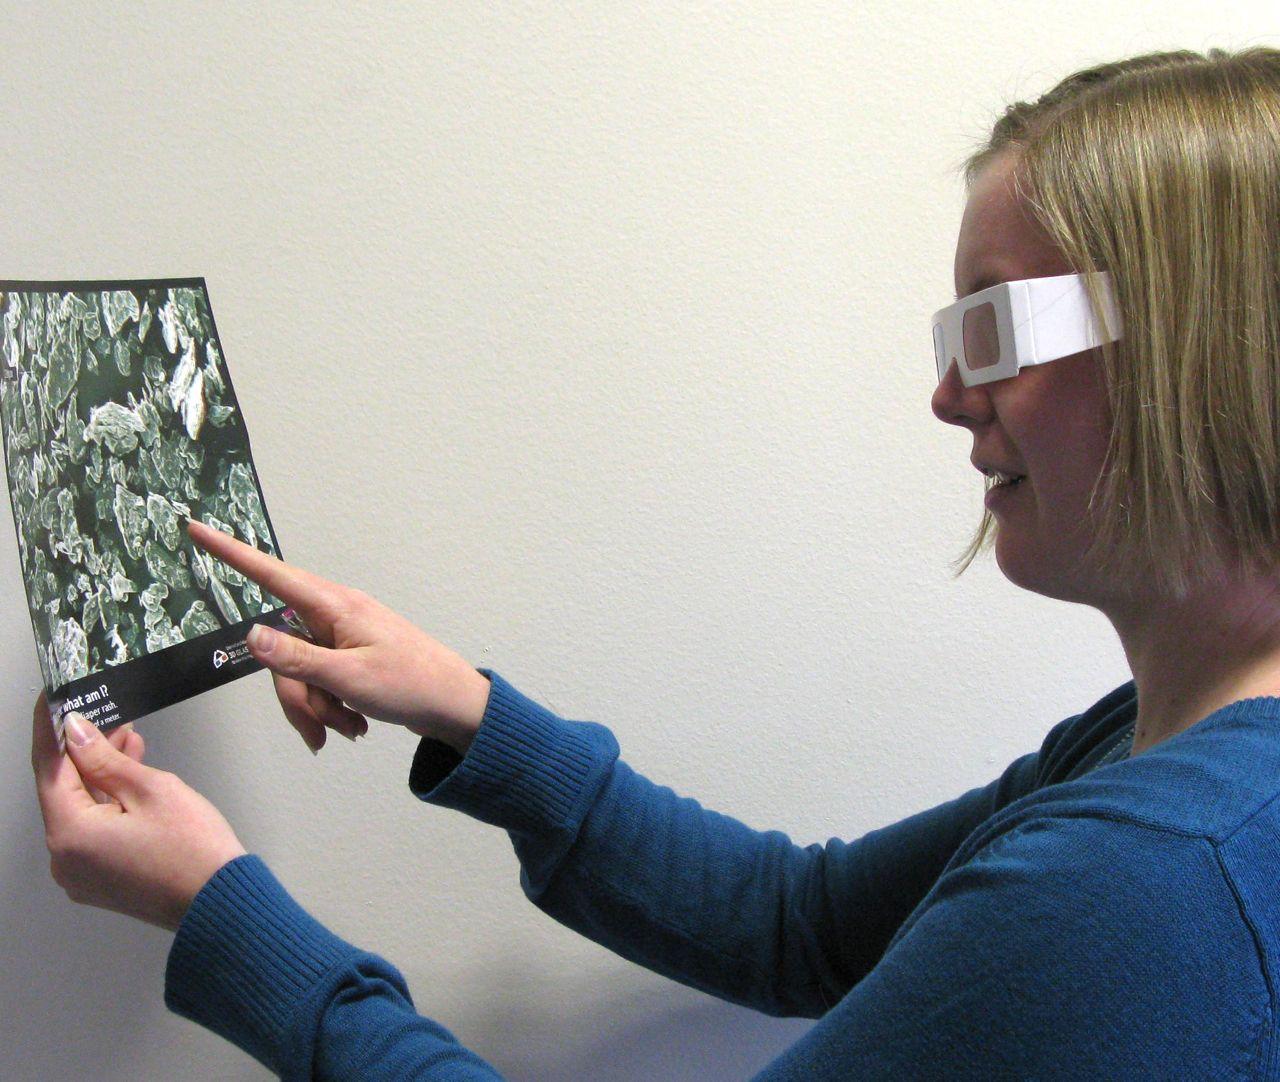 Learner uses 3D glasses to look at a image printed on a sheet of paper